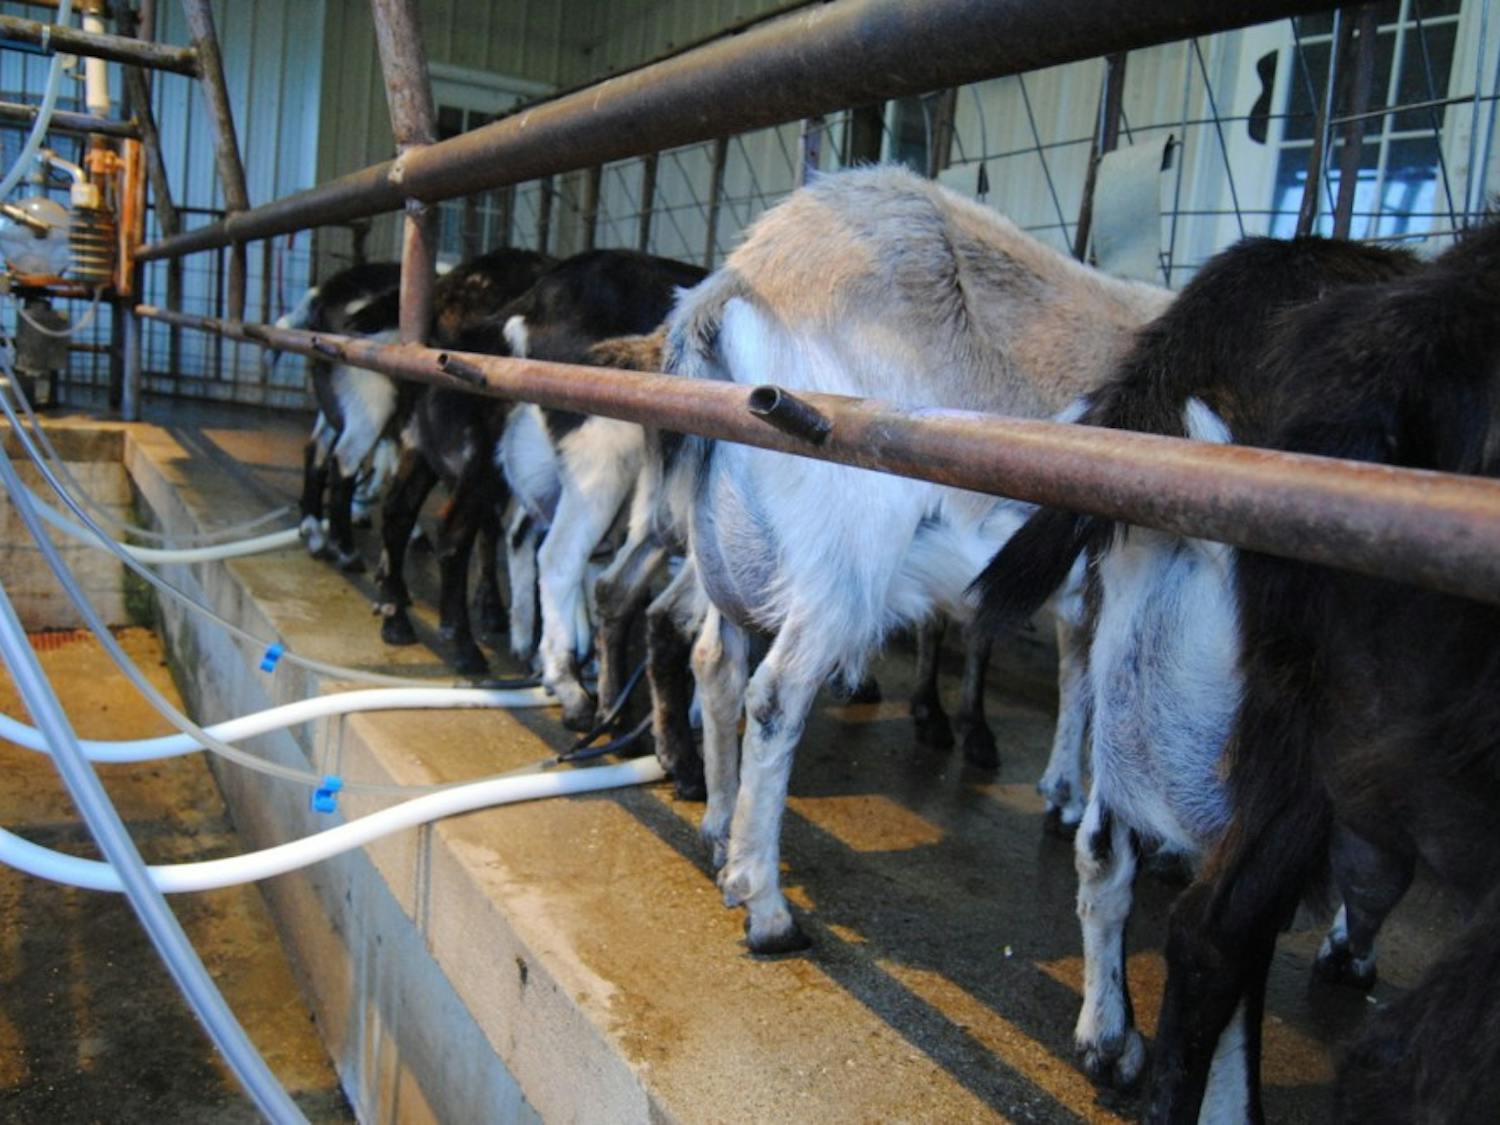 Athens County goats get milked  